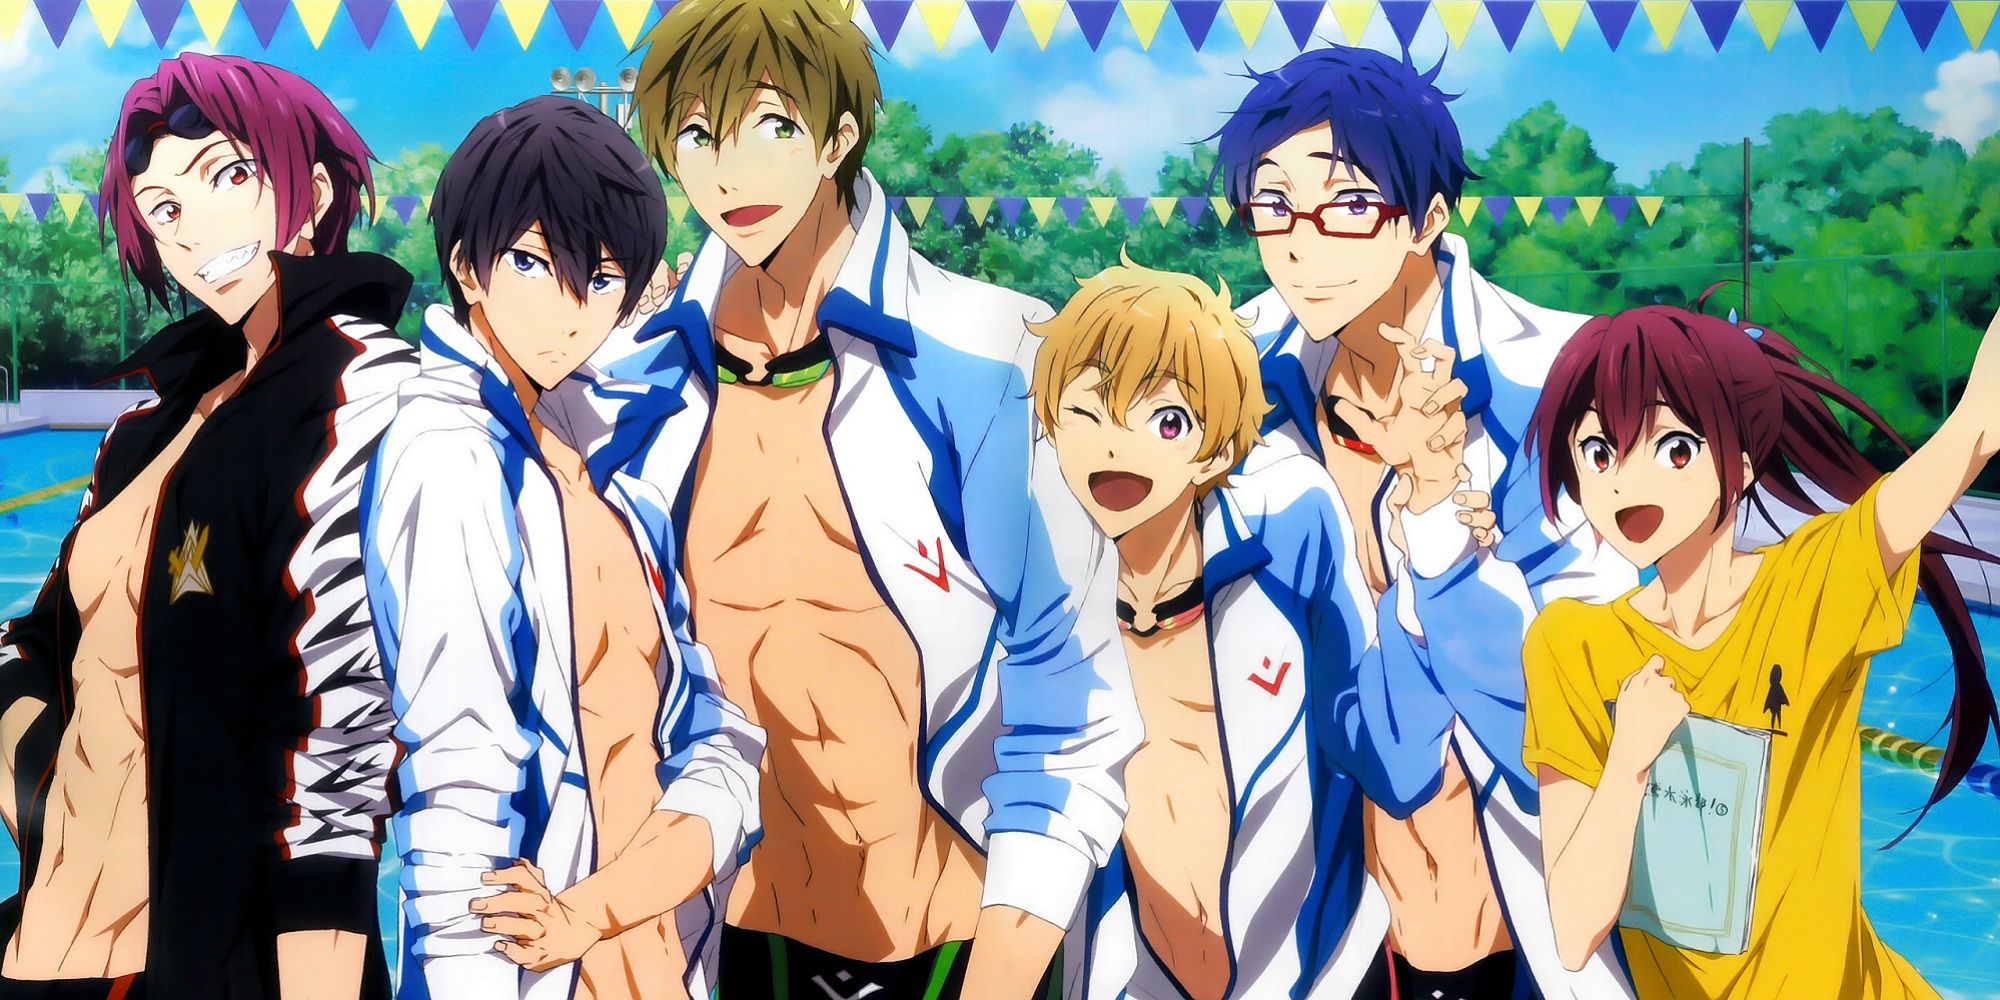 Available!  Iwatobi Swim Club is an anime series about competitive swimming.